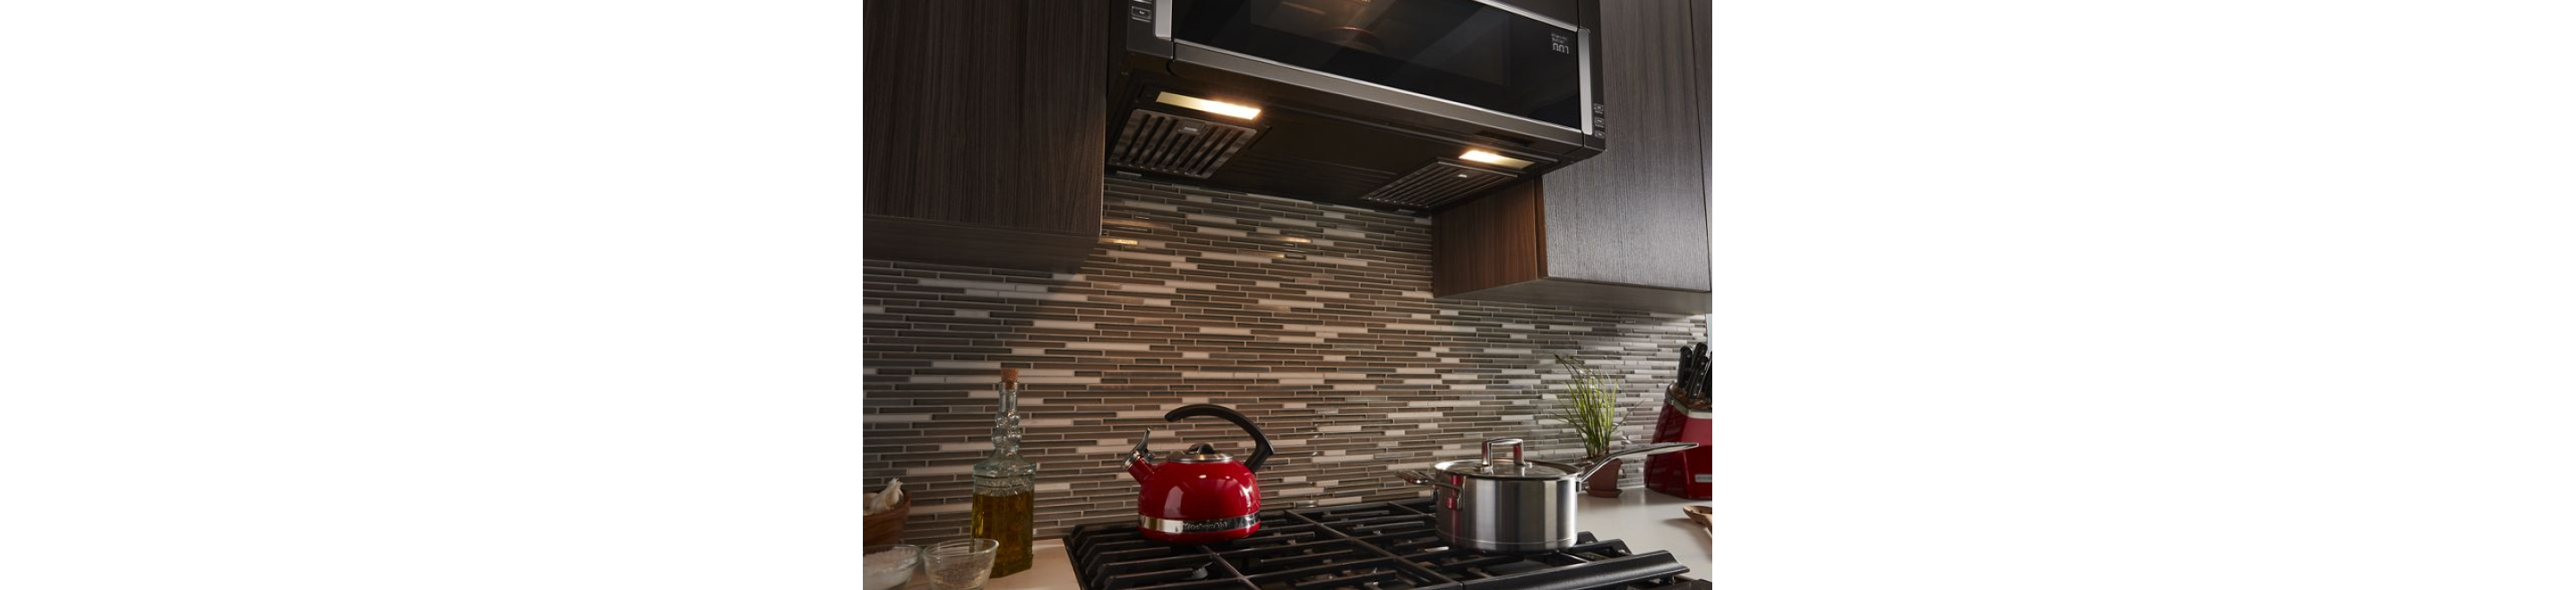 Help clear the air with a microwave vent hood from KitchenAid.